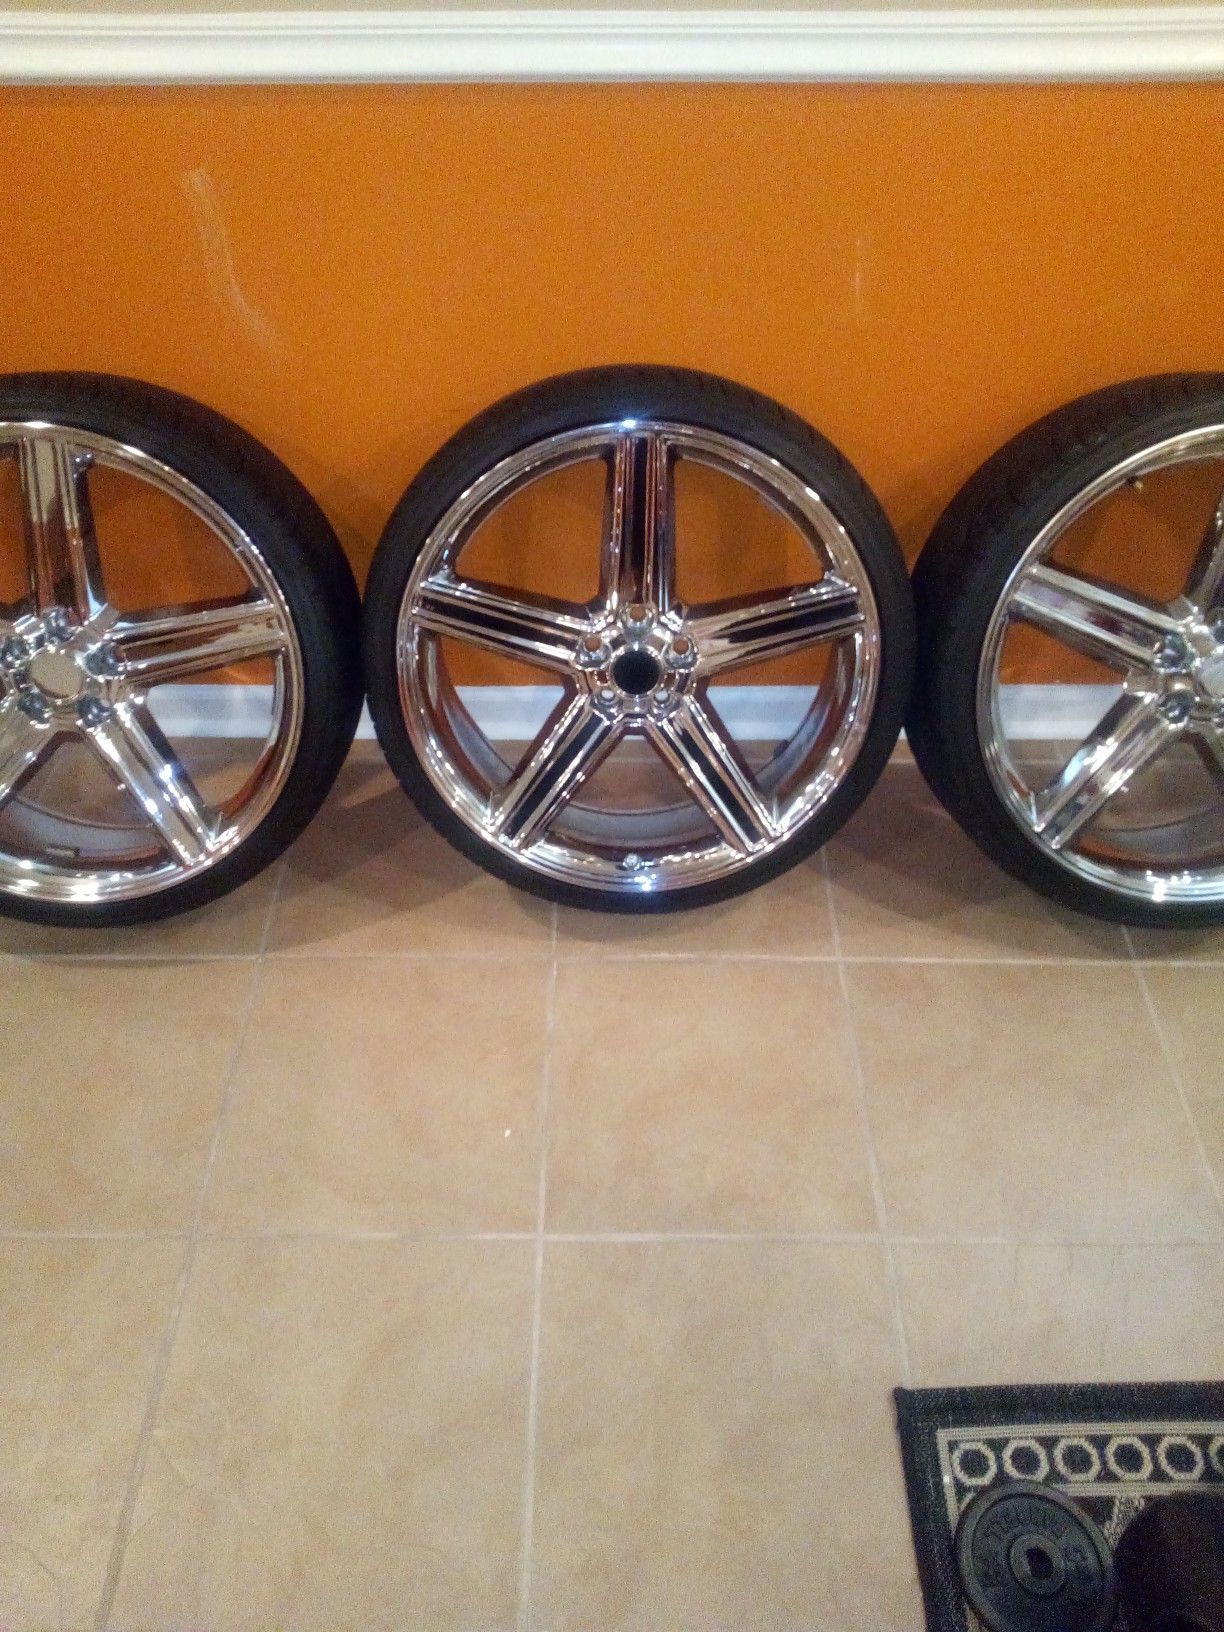 22 inch irocs with tires